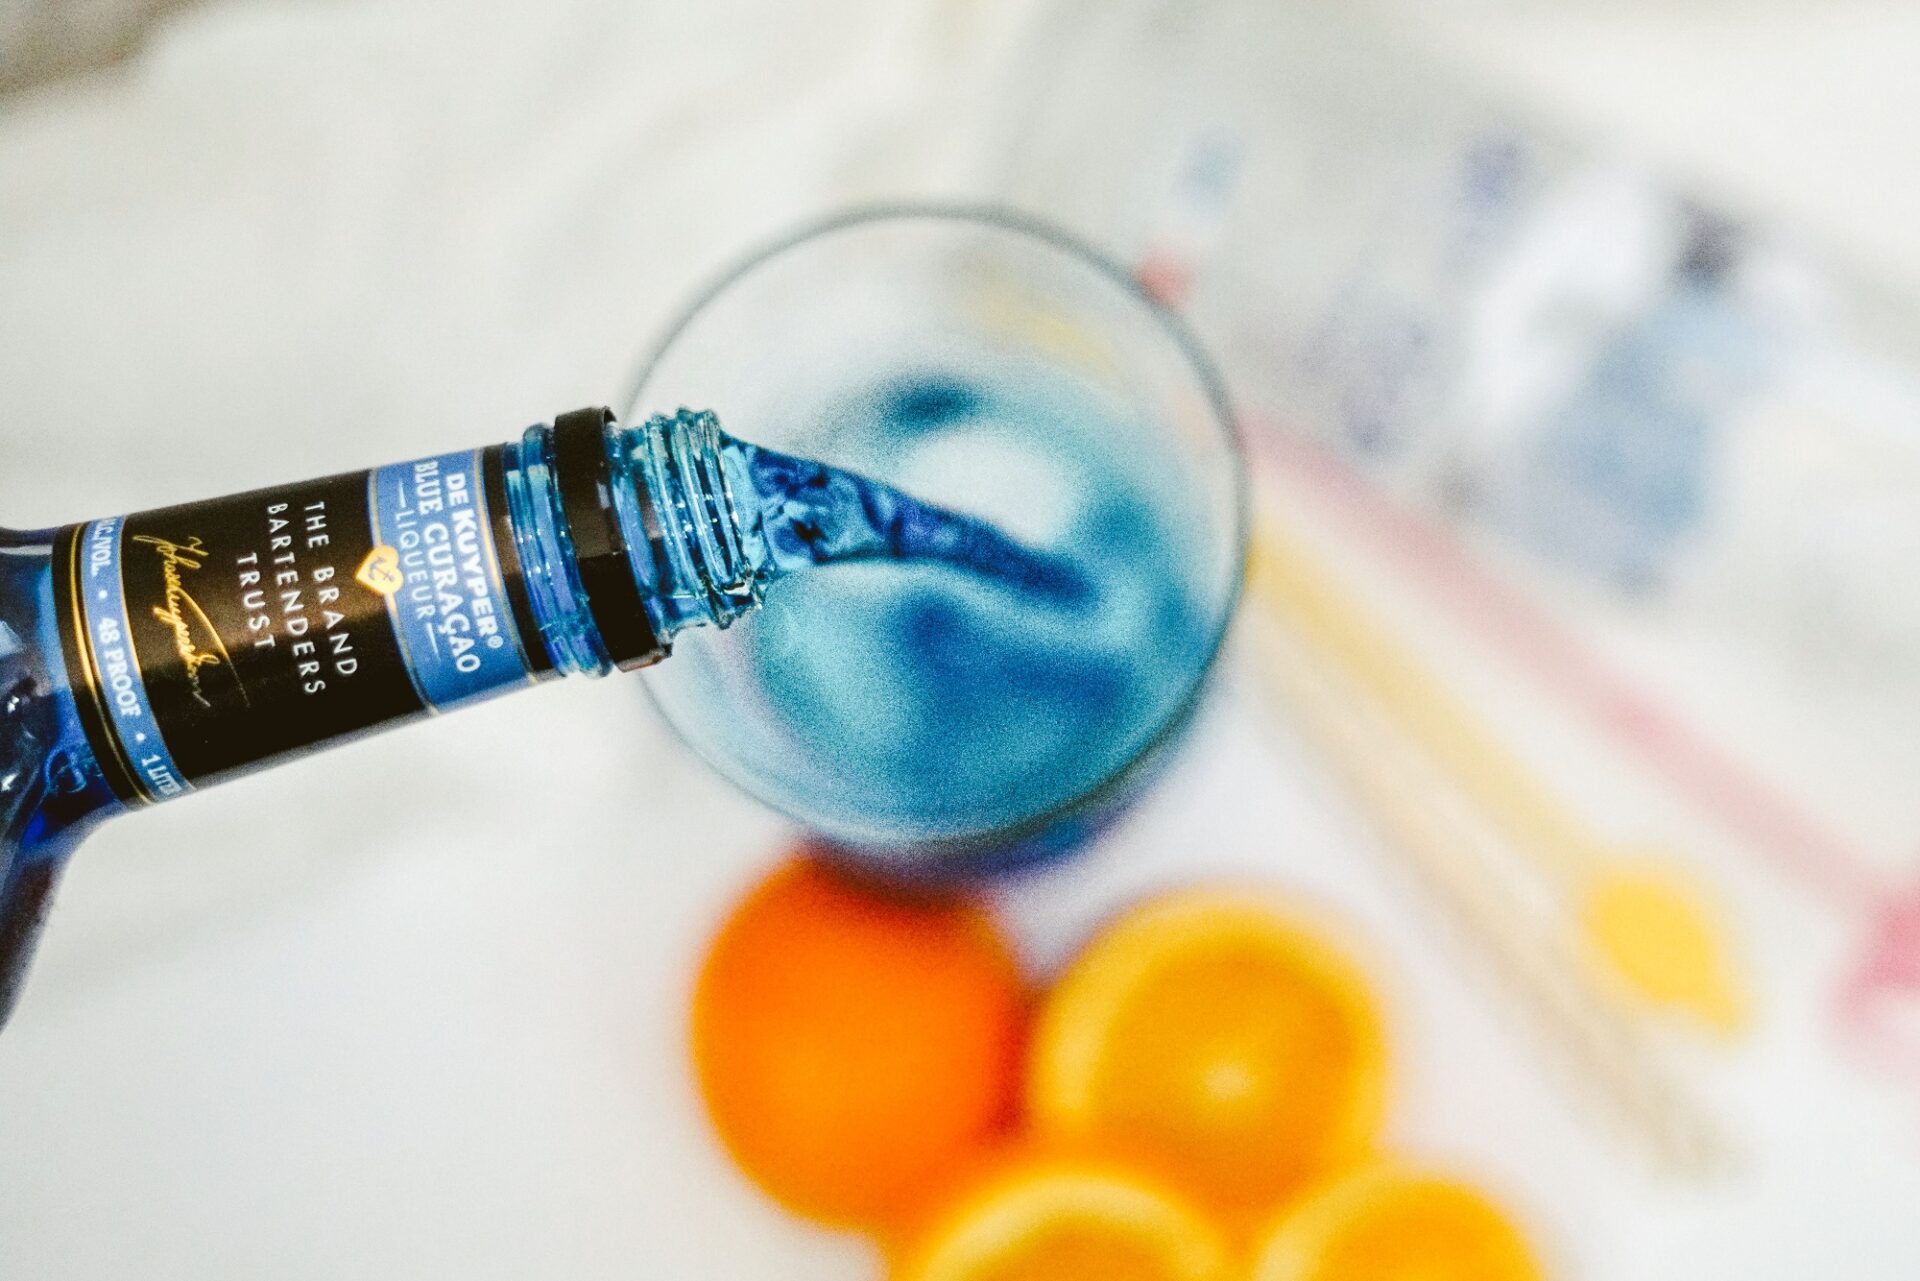 Pouring Blue Curacao into a glass.